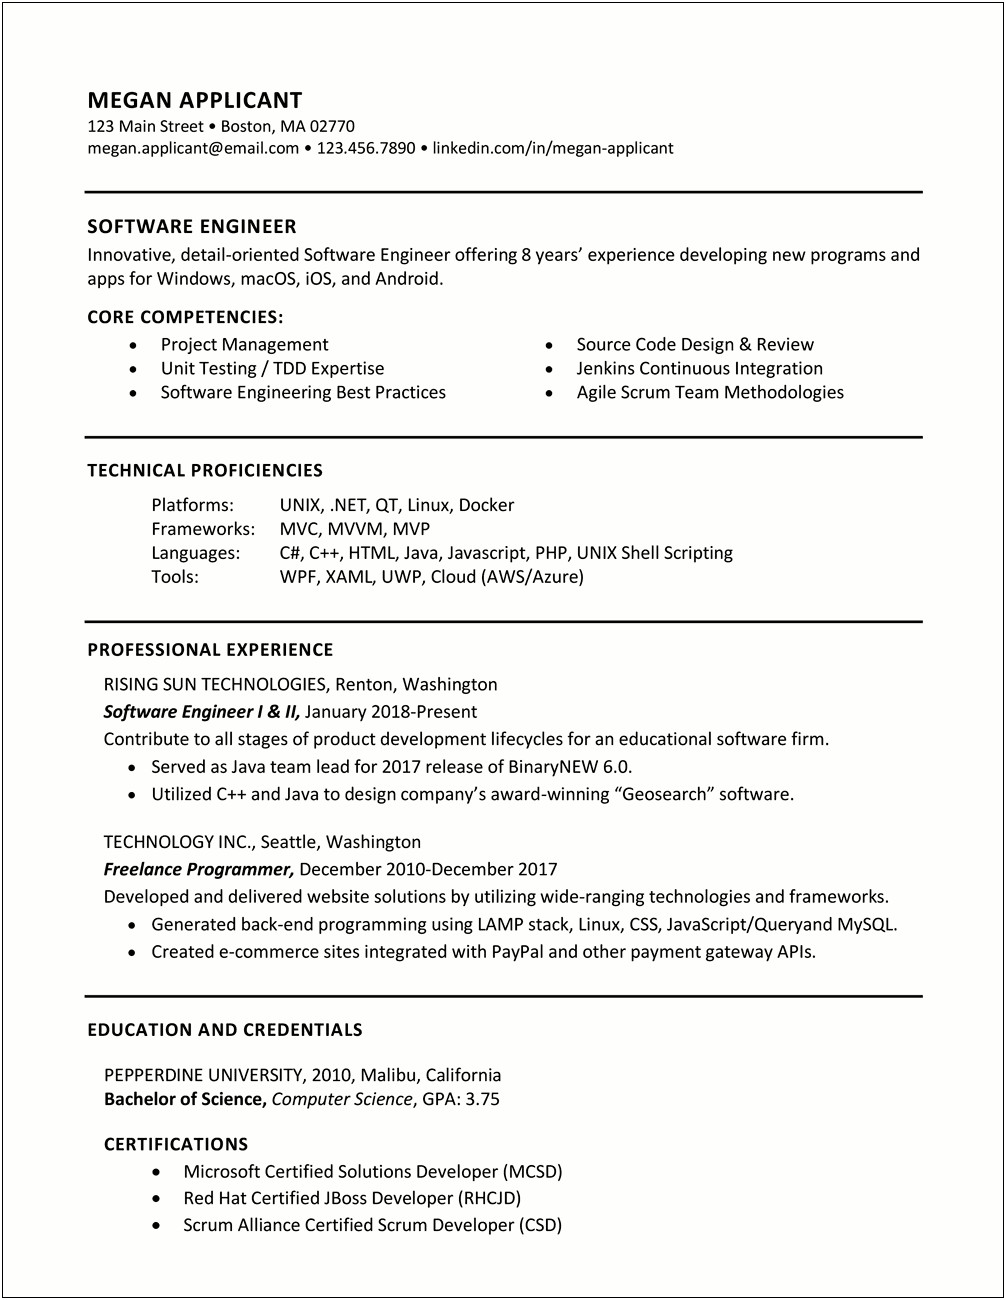 Listing Skills And Abilities Resume